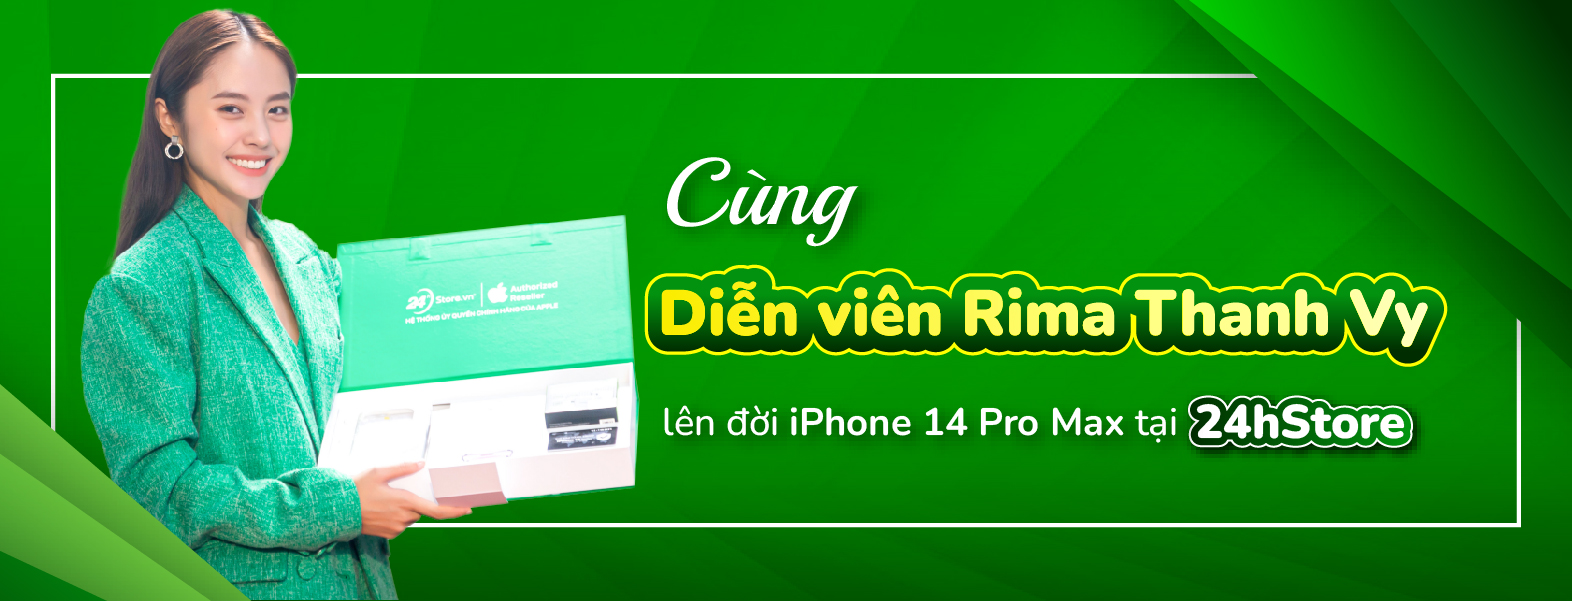 Rima Thanh Vy sắm iPhone 14 Pro Max